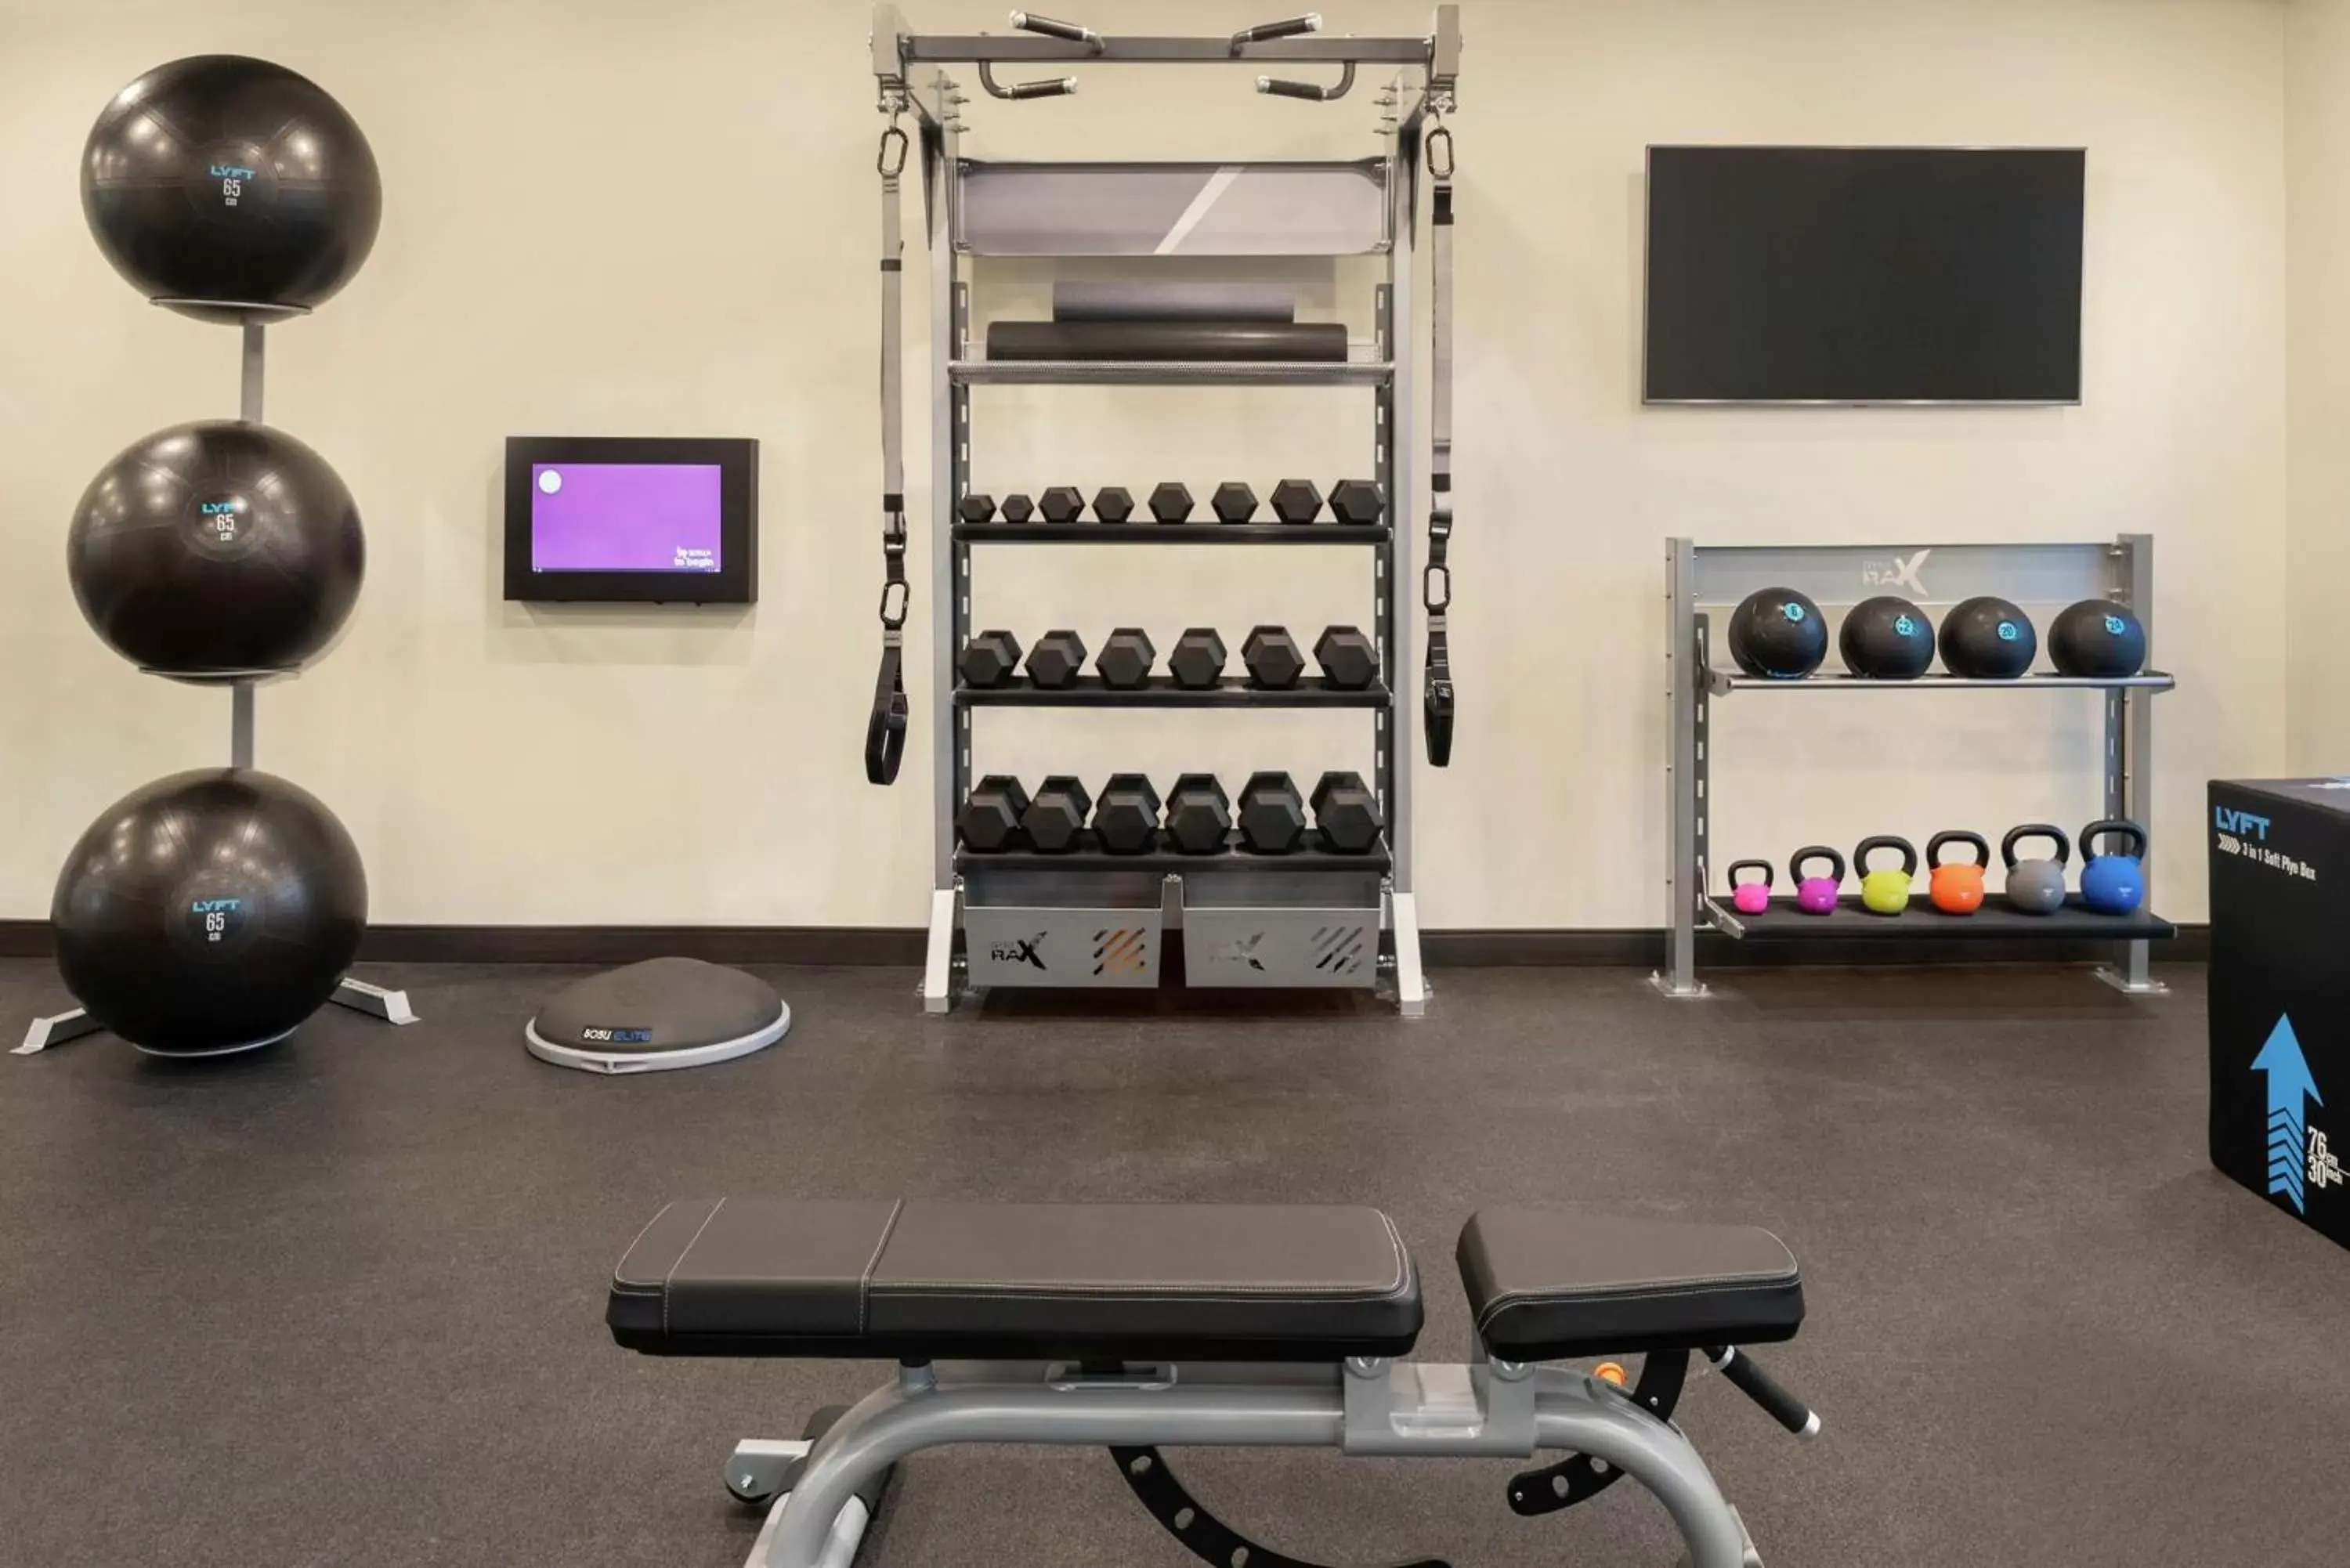 Fitness centre/facilities, Fitness Center/Facilities in Tru By Hilton Duluth Mall Area